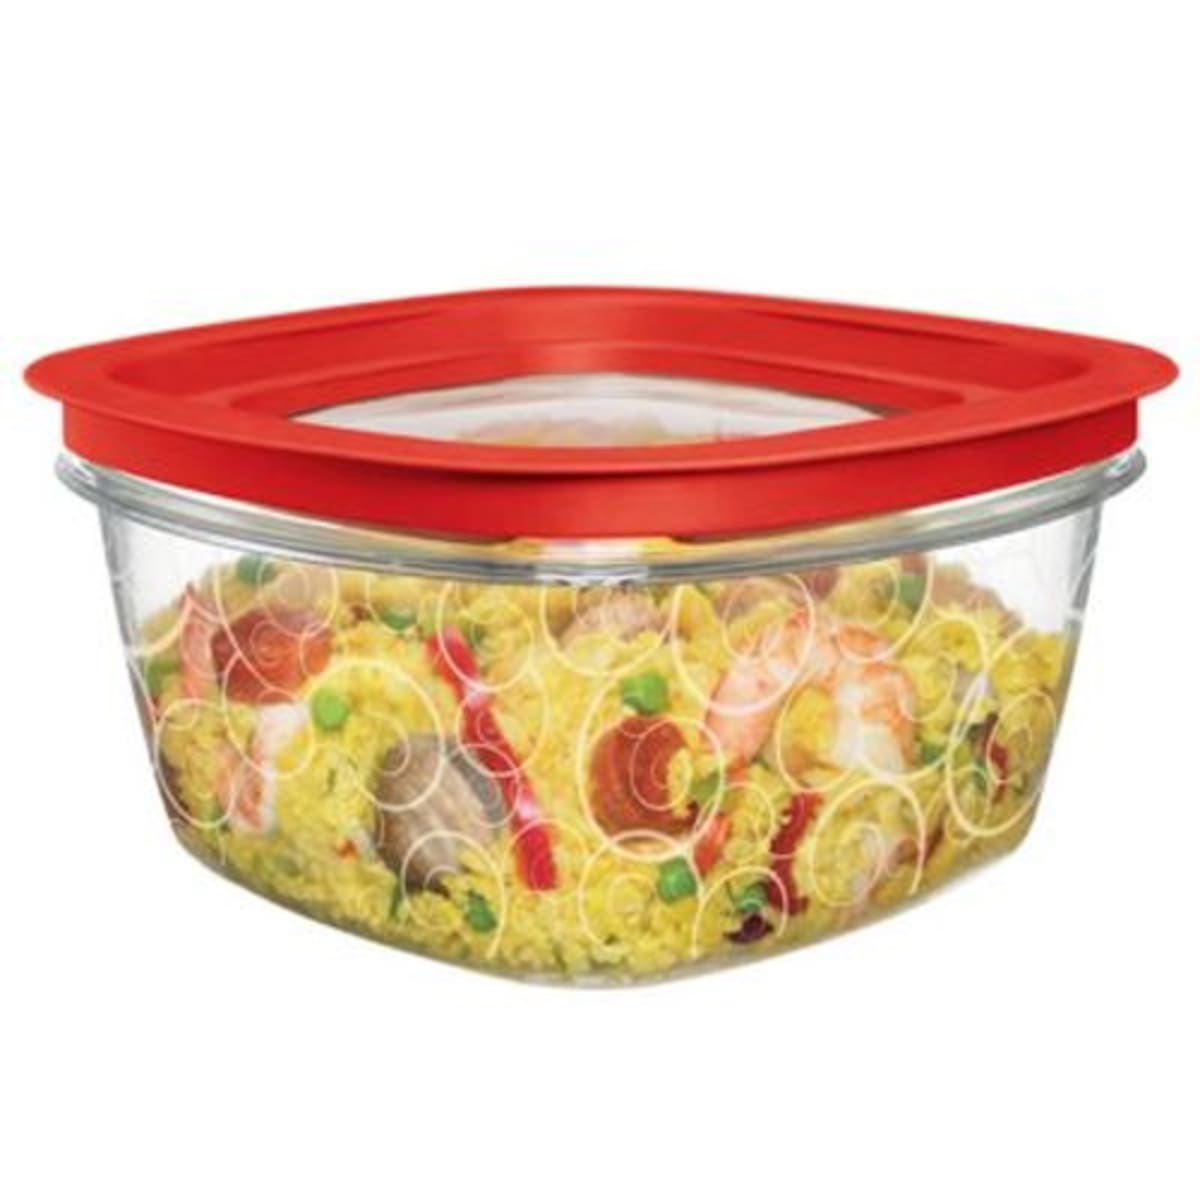 Rubbermaid Premier Food Container, 14 Cup, Bakeware & Cookware